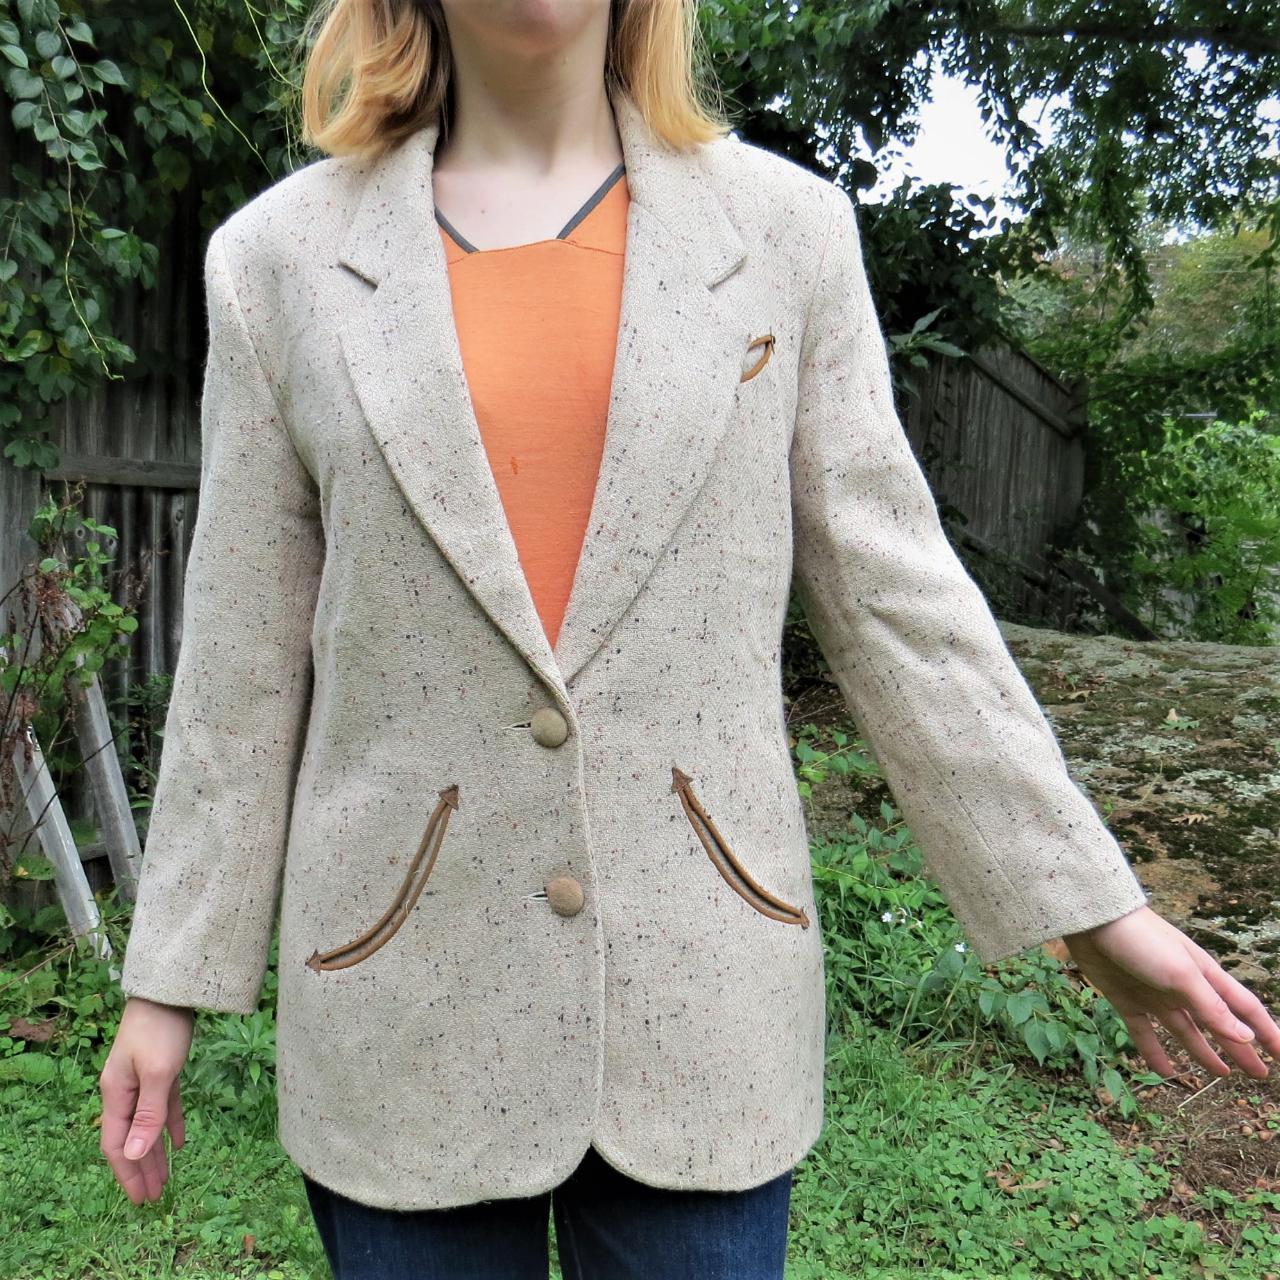 Product Image 1 - Vintage 80s New Frontier Blazer
size